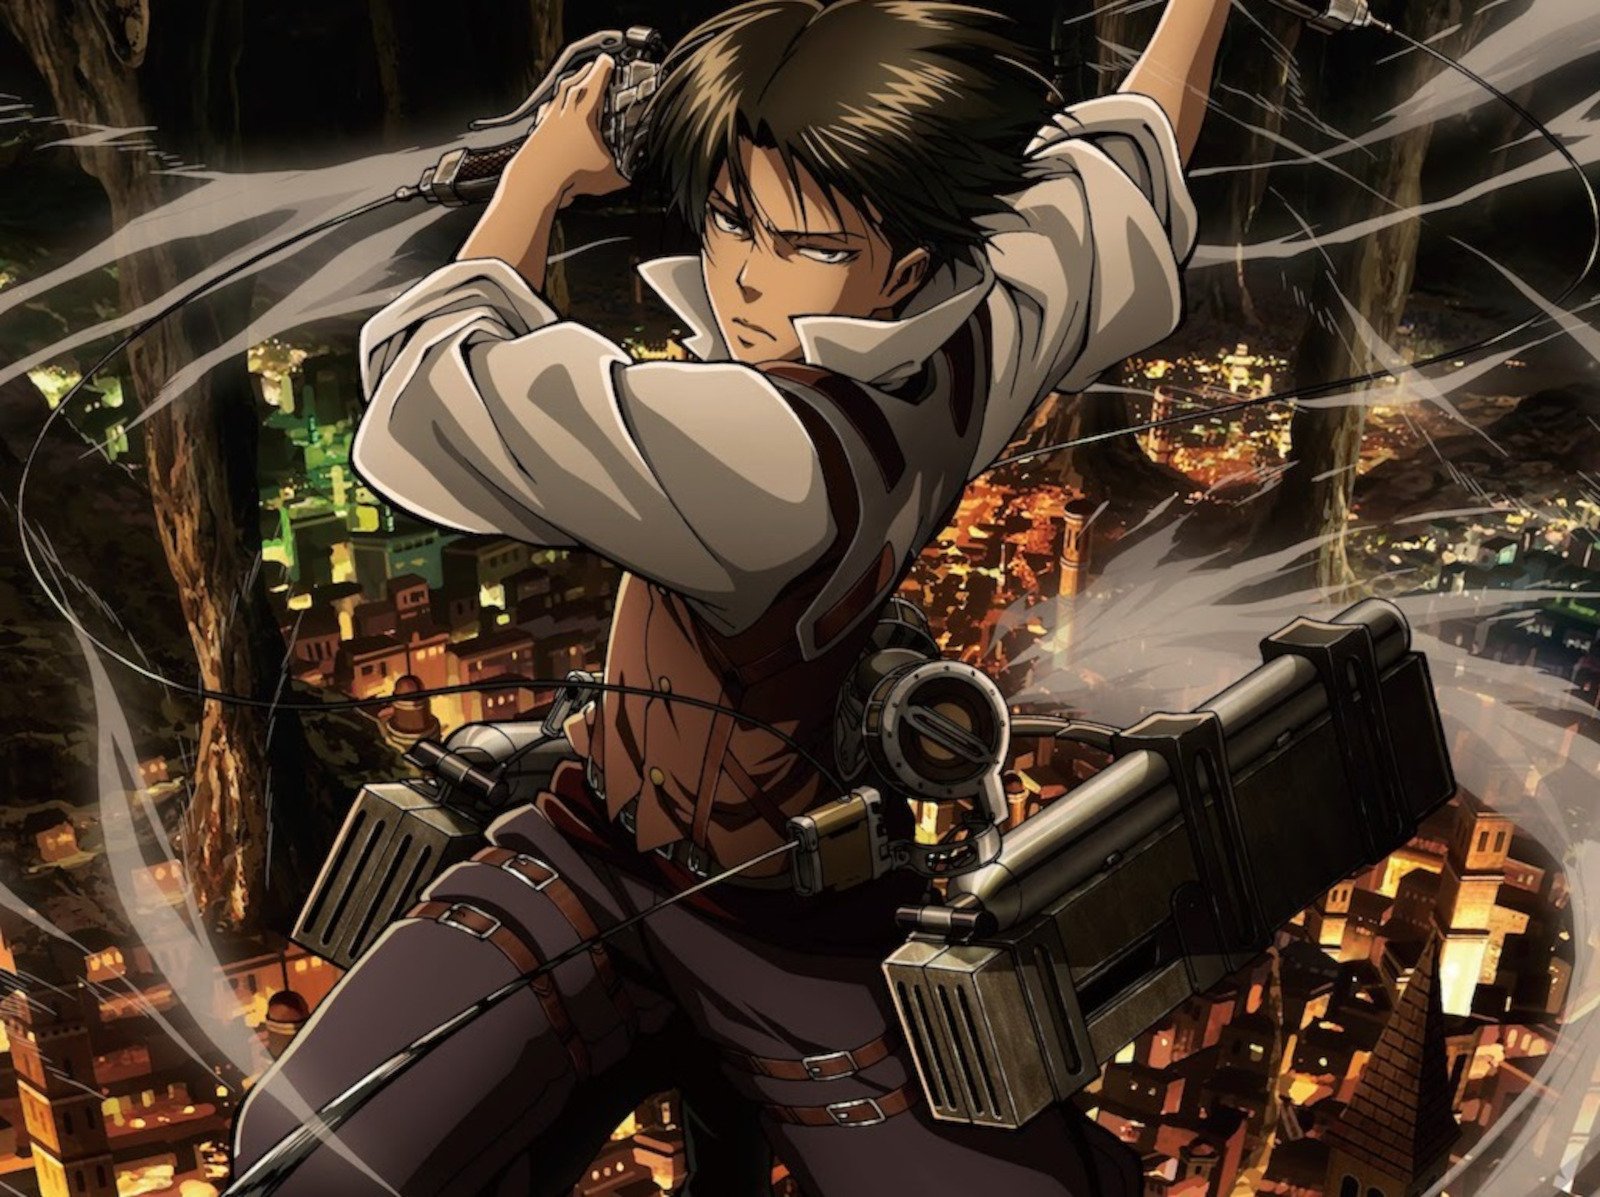 Attack on Titan' Season Finally Reveals What Happened to Levi and Hange